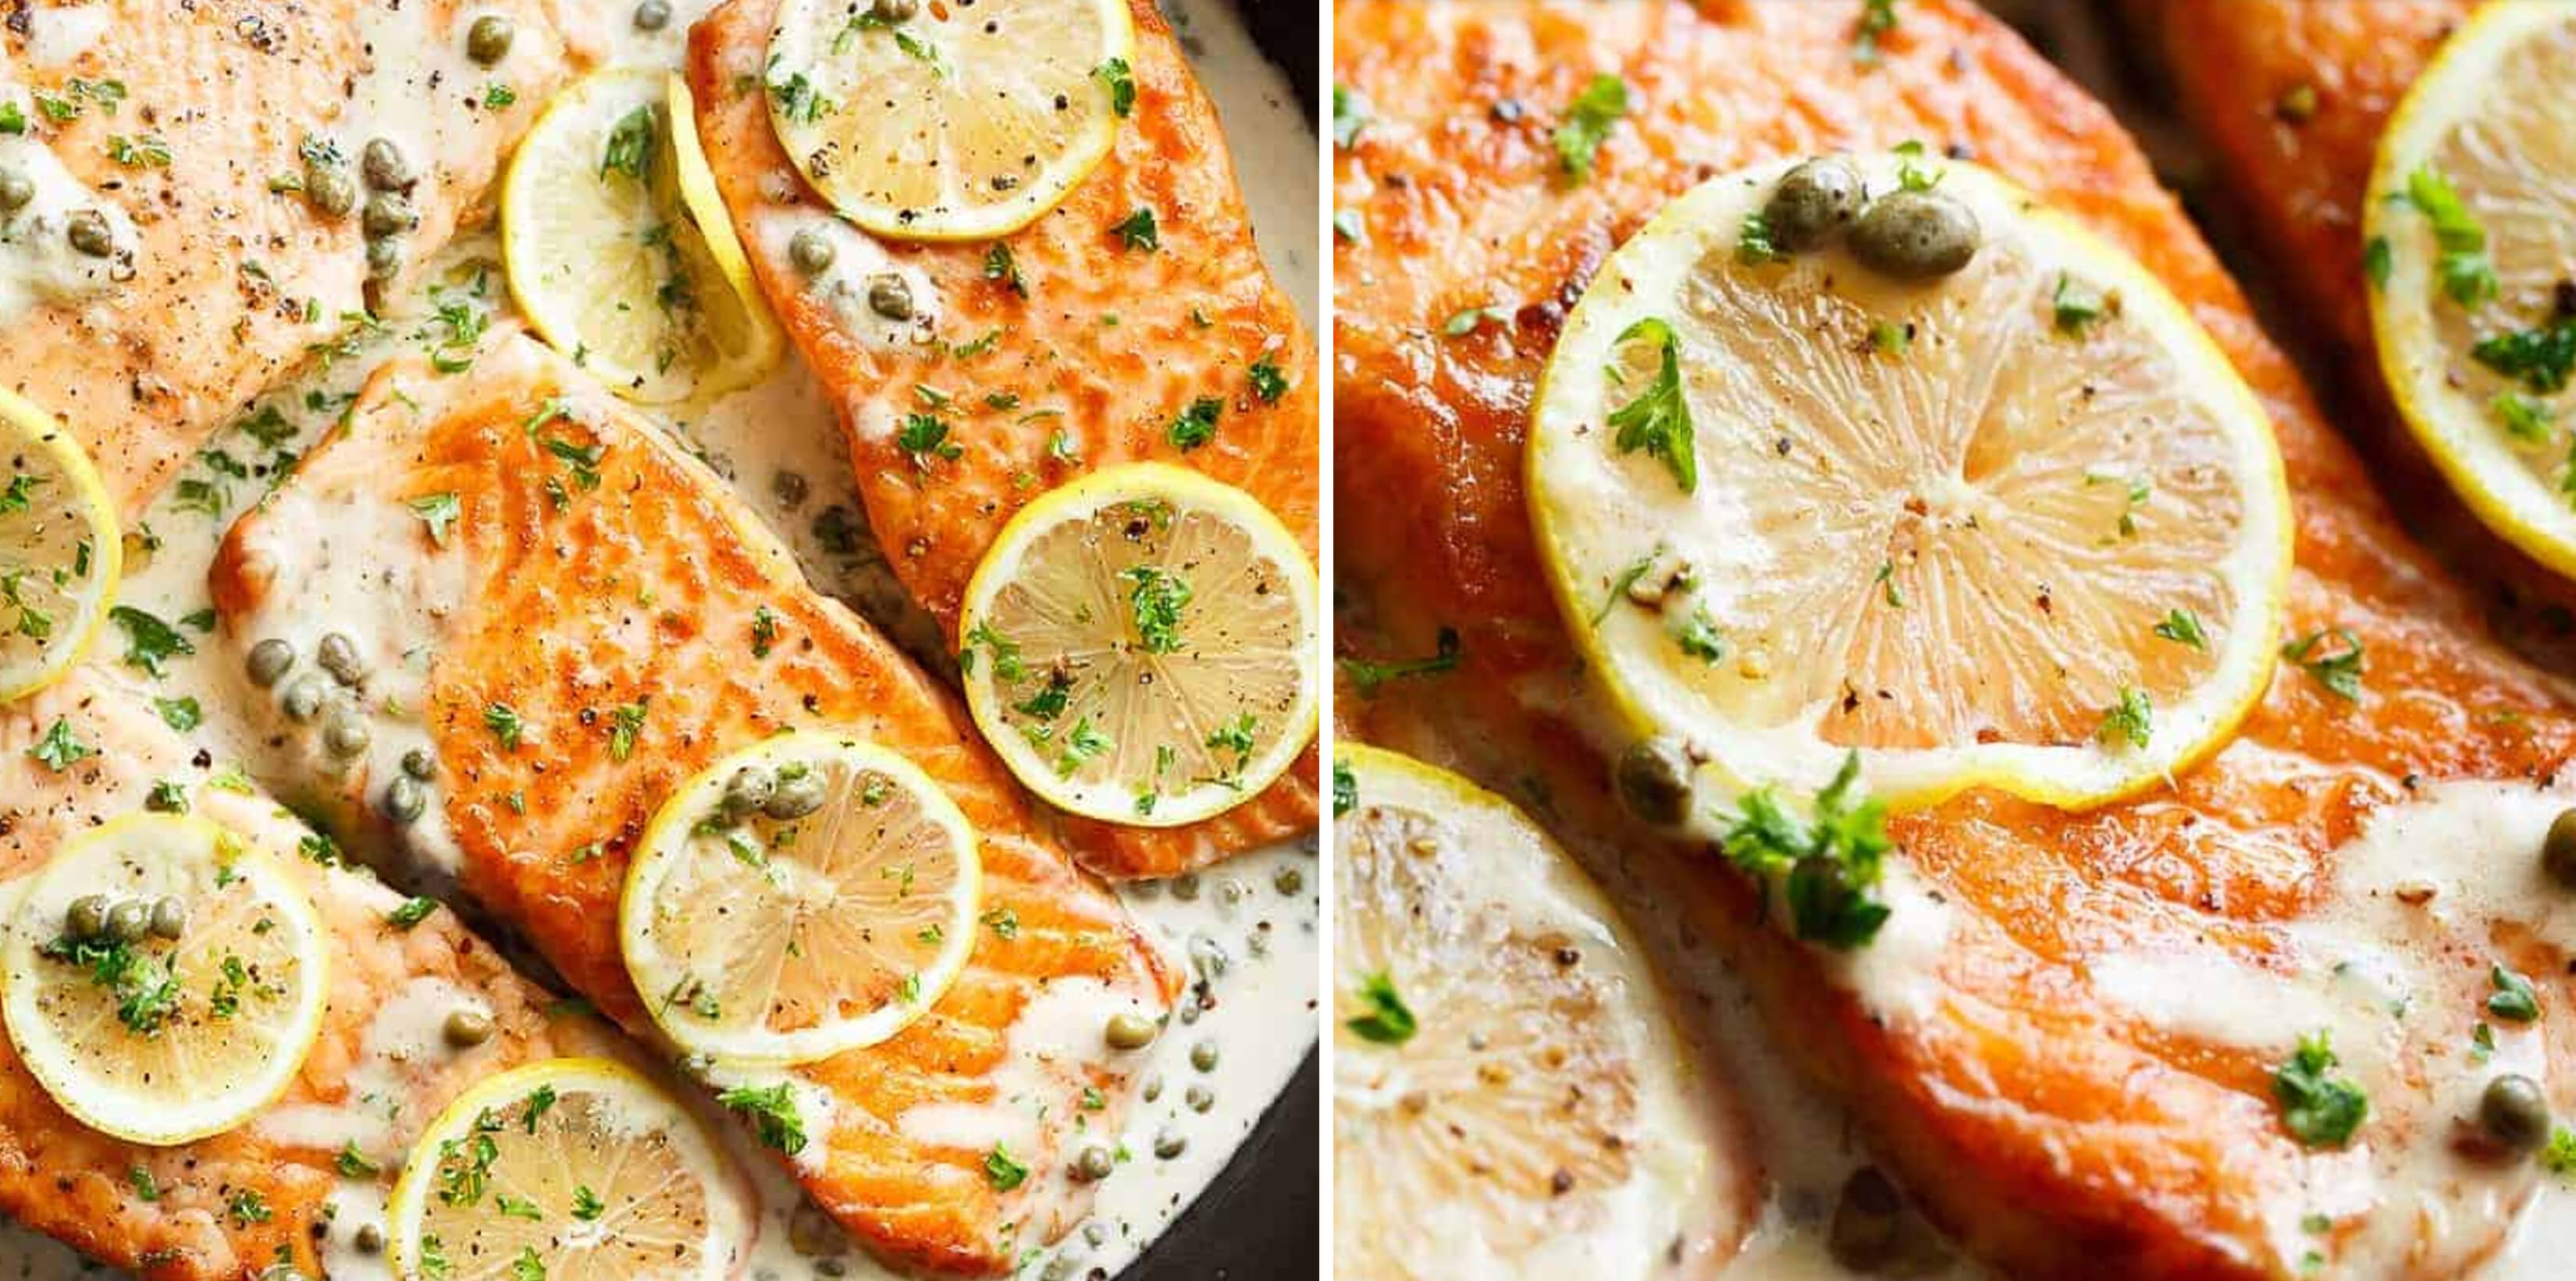 Enjoy this creamy lemon garlic salmon recipe just in time for your ...